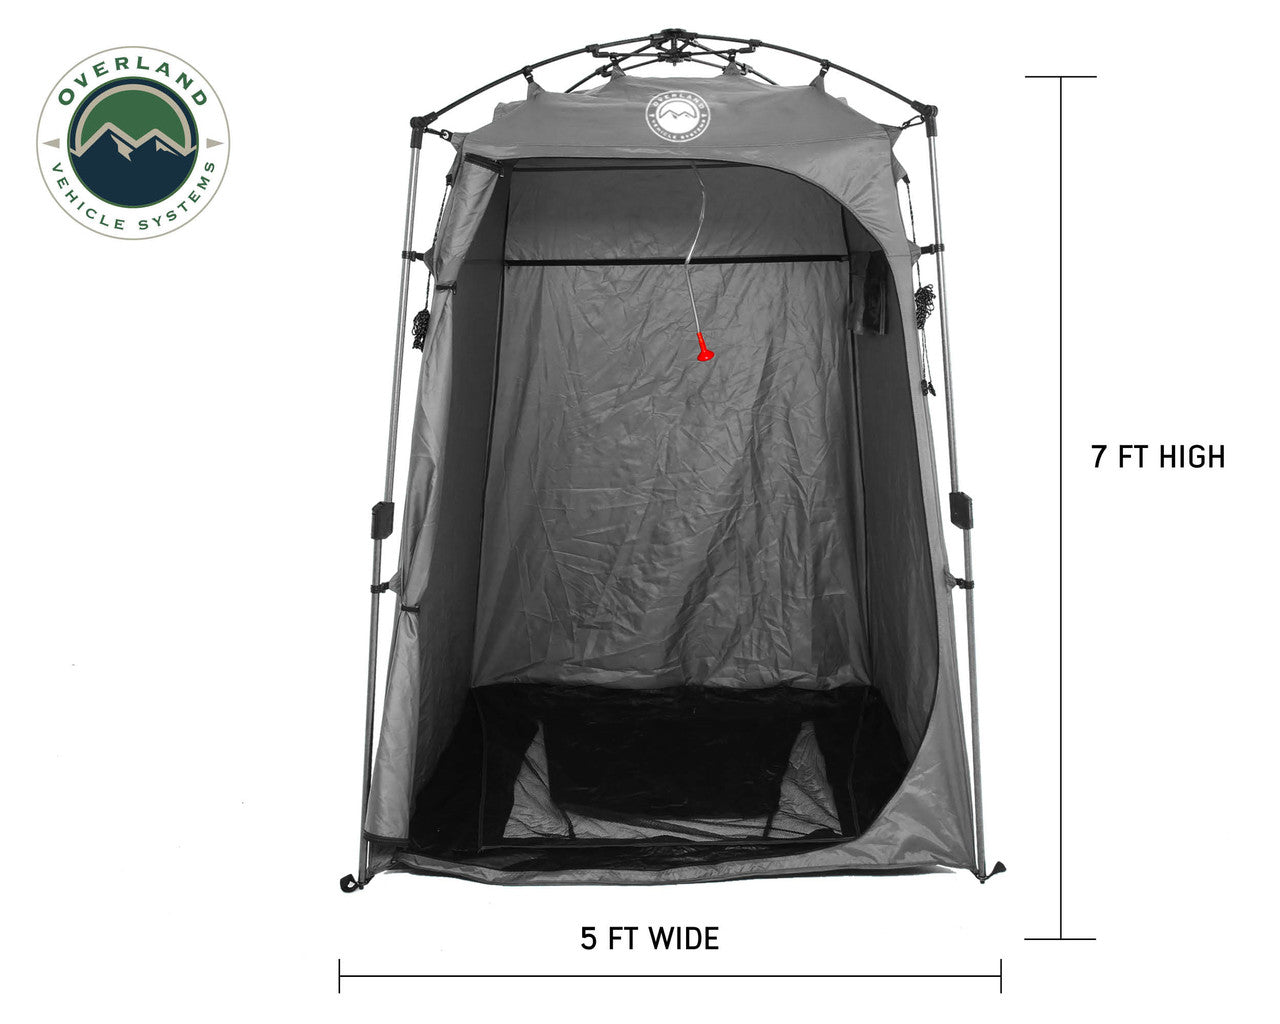 OVS Portable Privacy Room With Shower, Retractable Floor And More